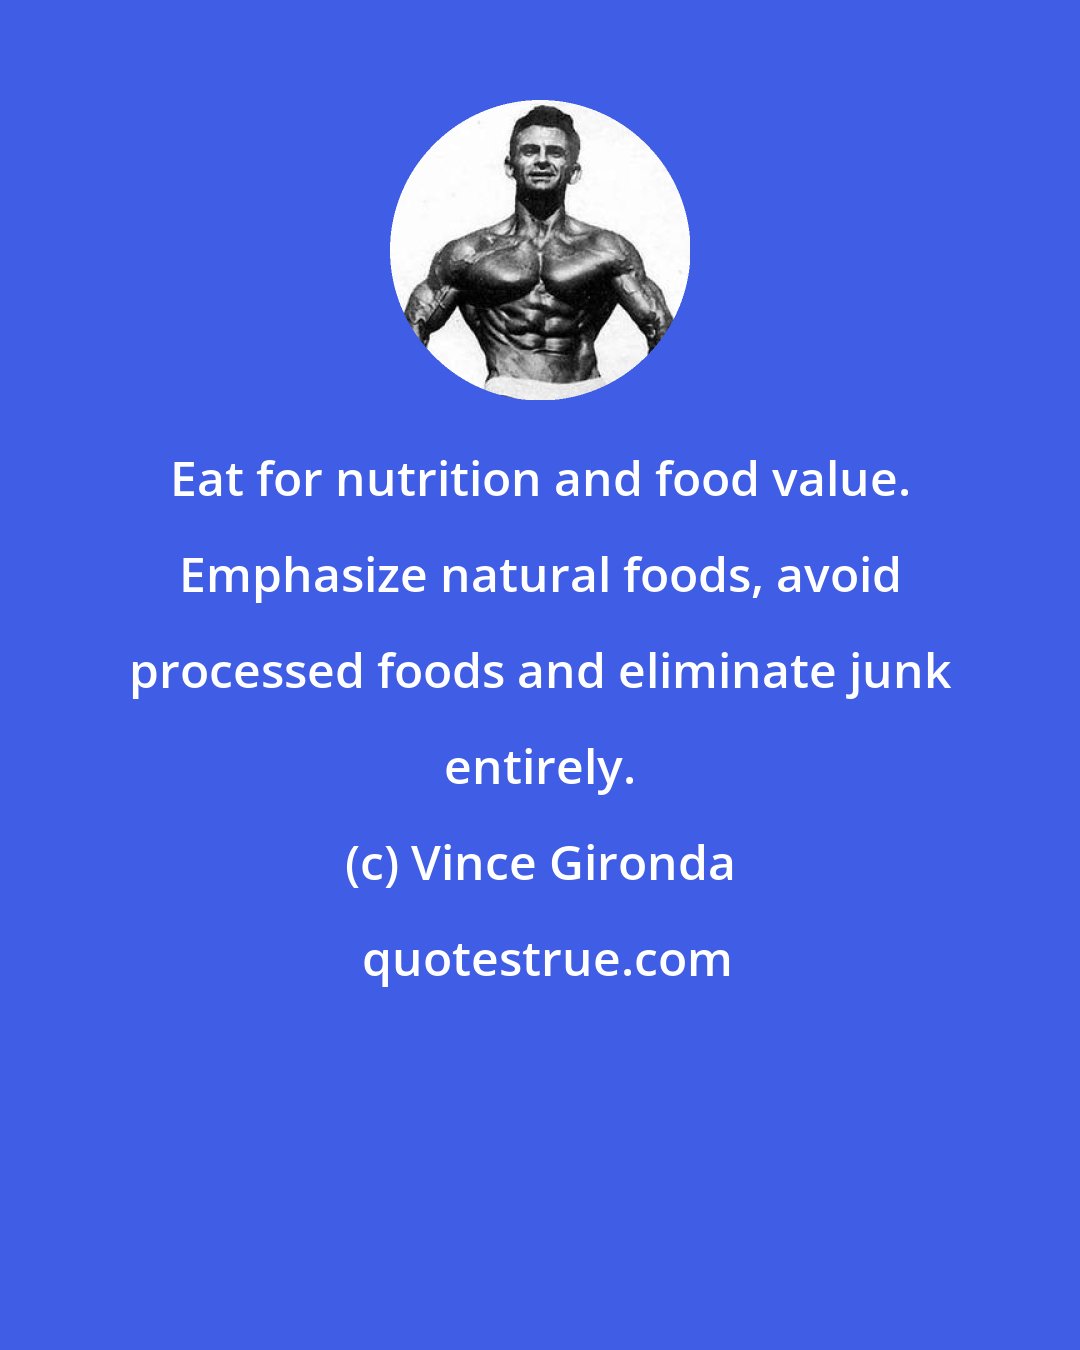 Vince Gironda: Eat for nutrition and food value. Emphasize natural foods, avoid processed foods and eliminate junk entirely.